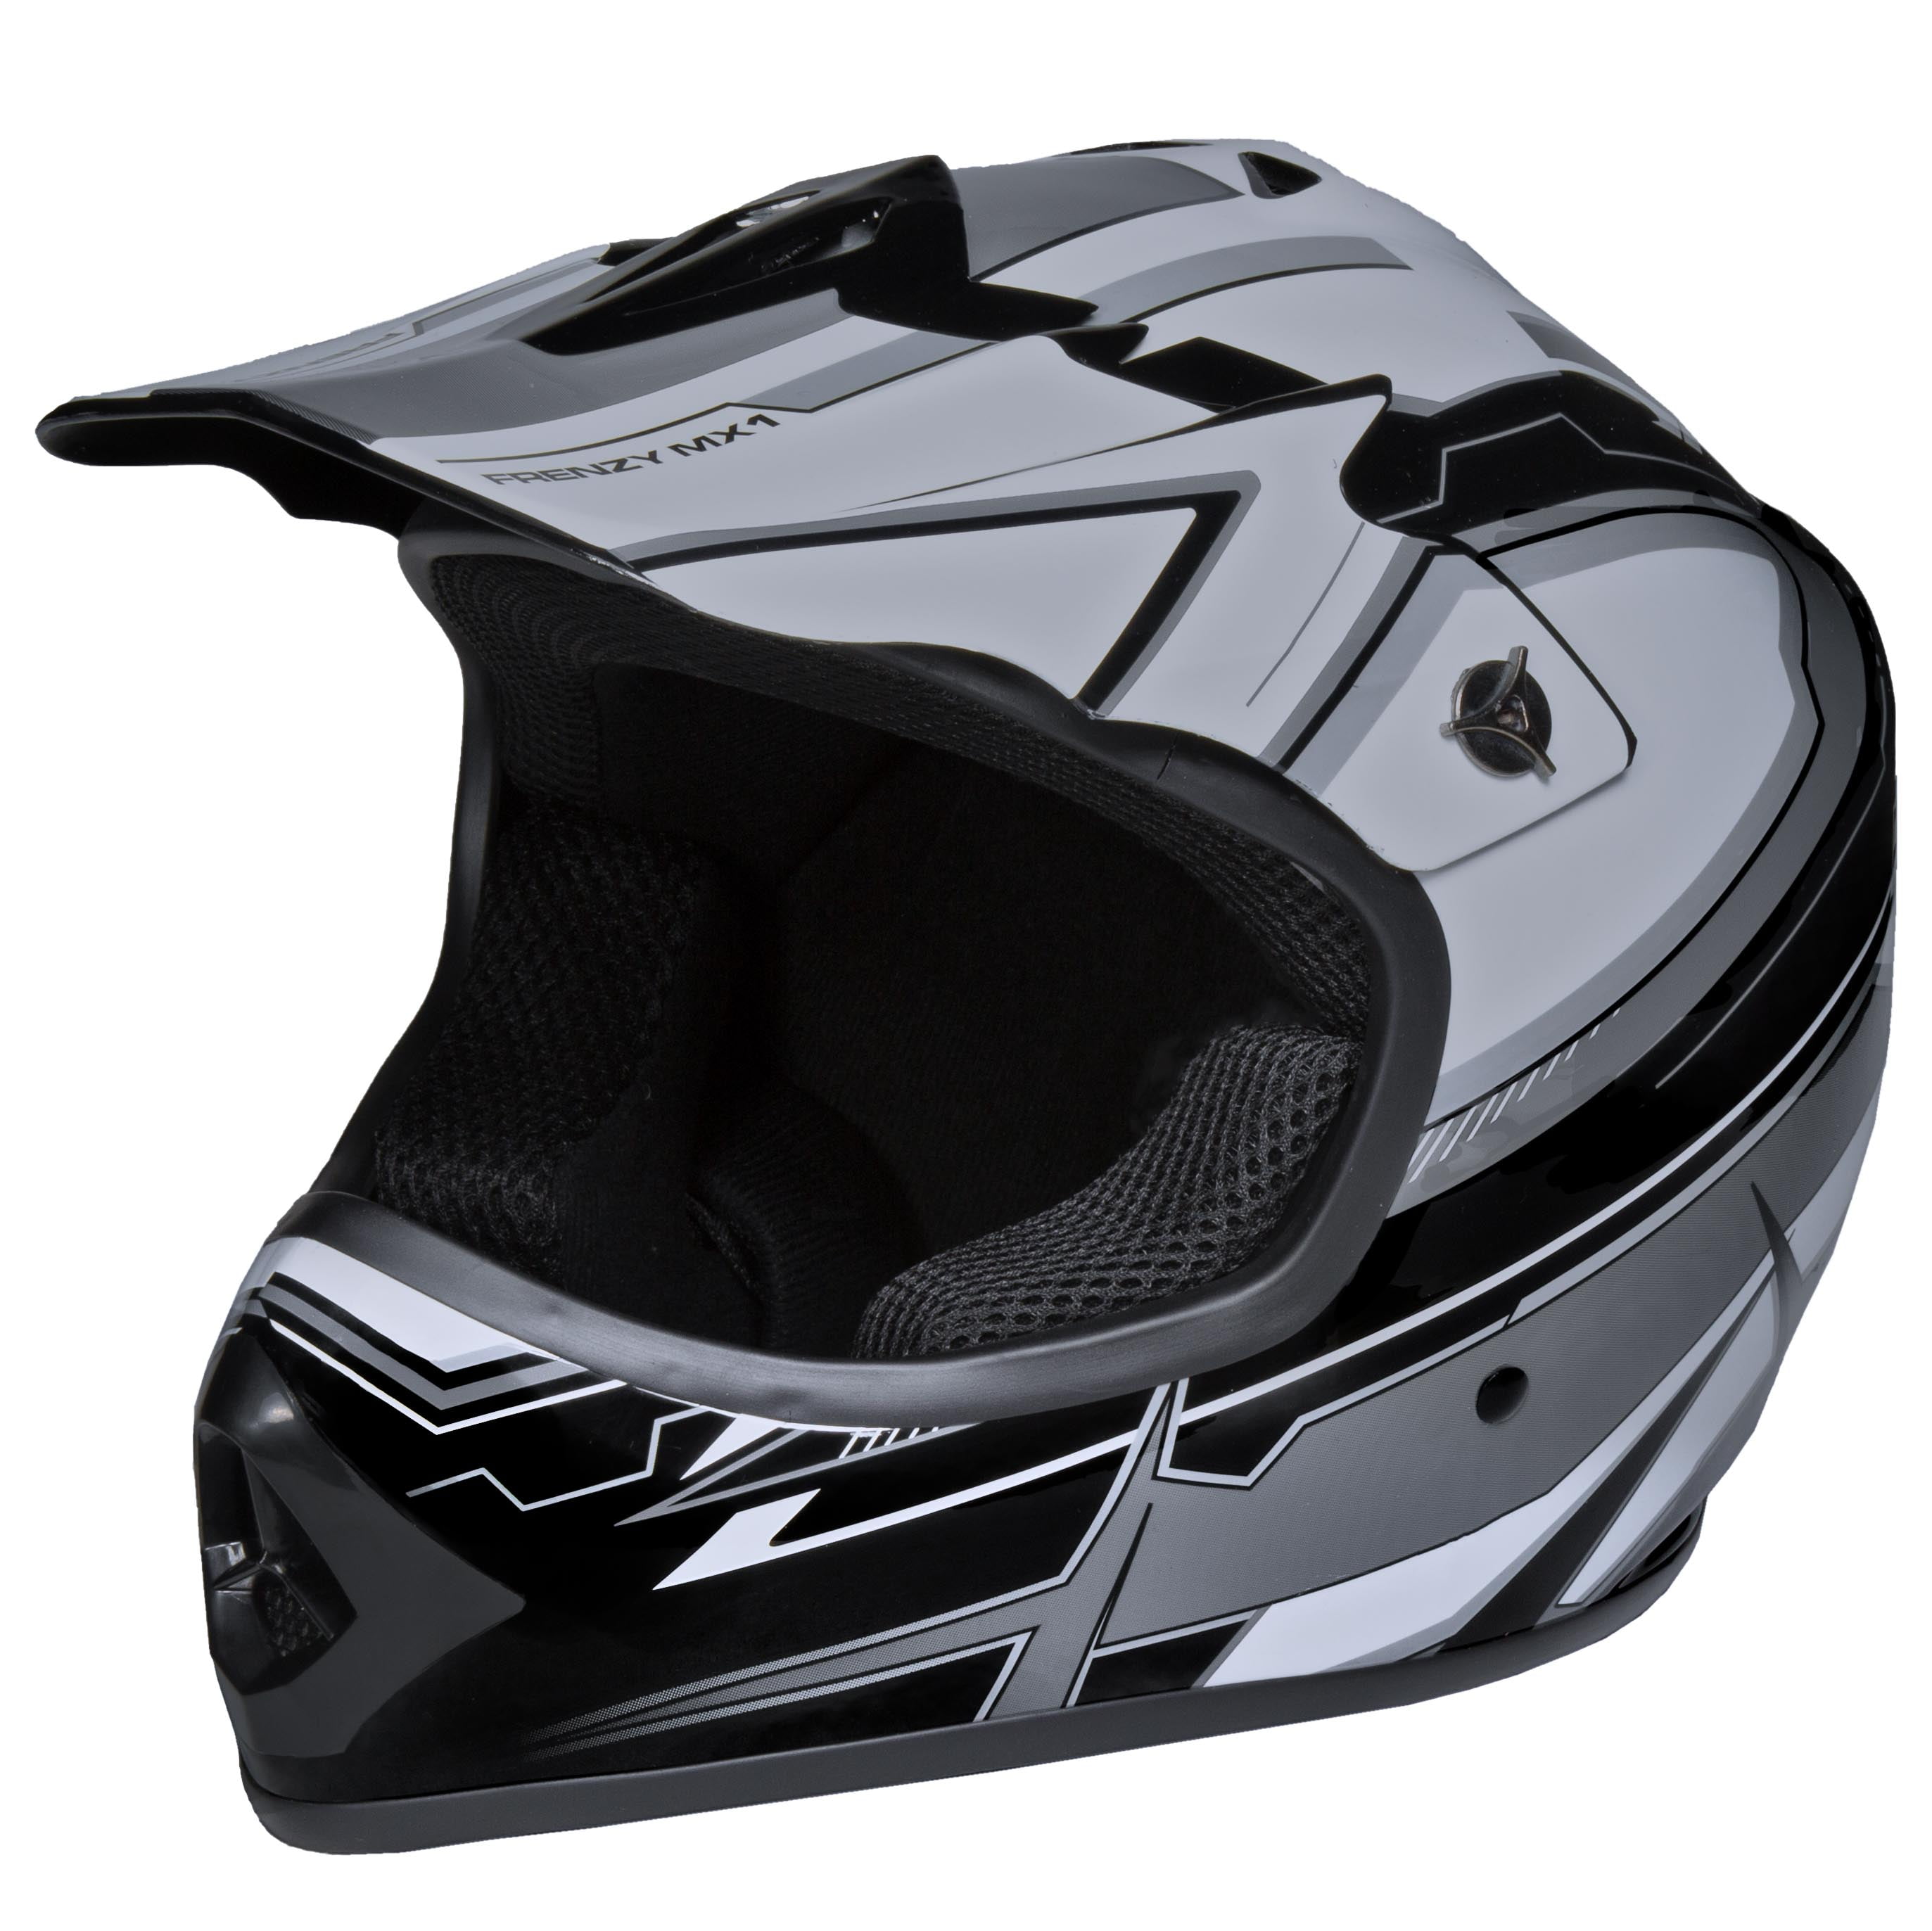 Youth Frenzy MX ATV off-road Helmet DOT Approved, Black/Grey, Youth Large